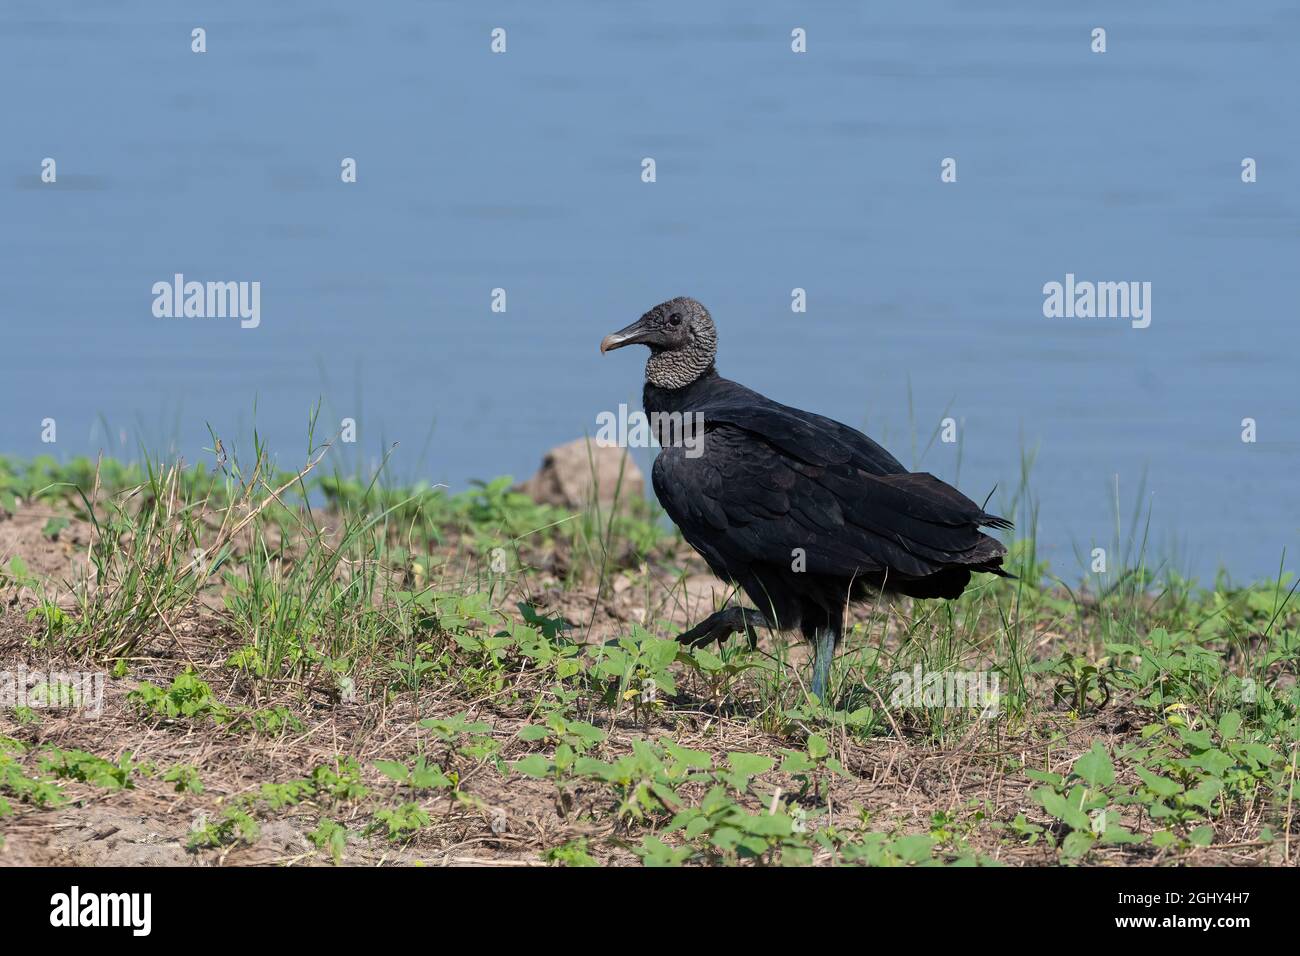 A Black Vulture, or Buzzard; casually strolling in the grass and weeds on the rocky shore of a lake. Stock Photo